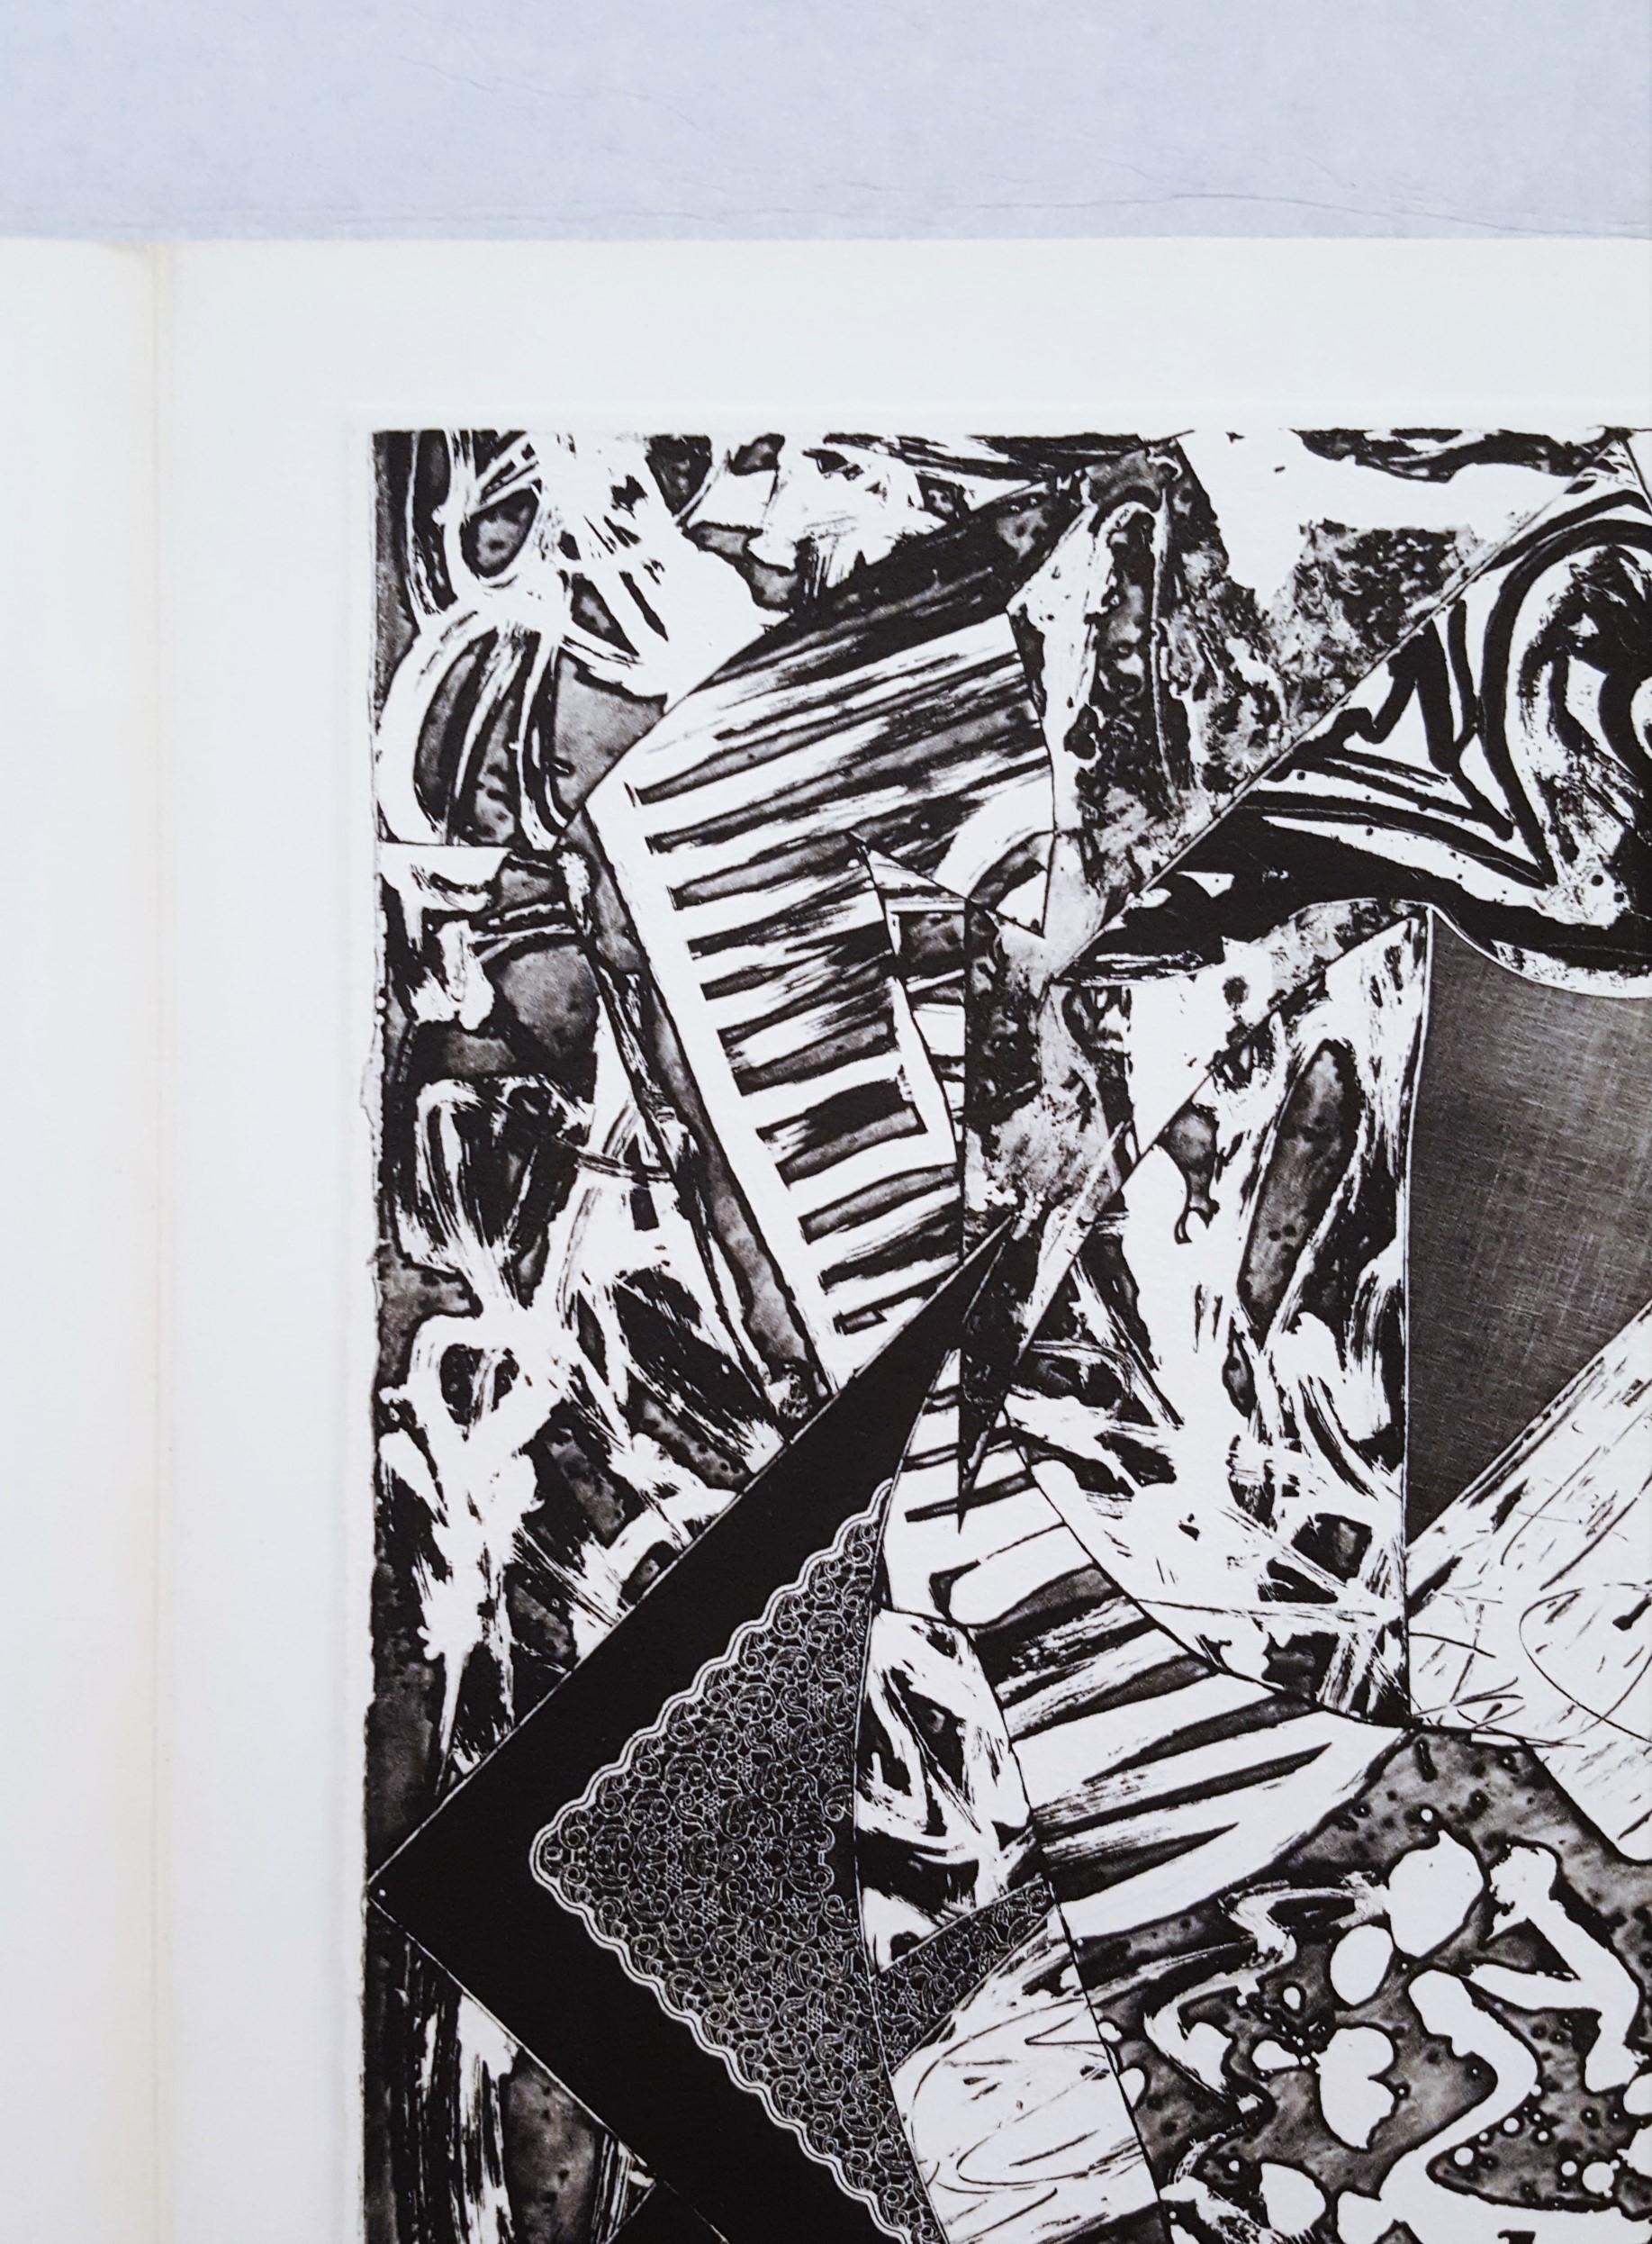 Swan Engraving III (inside Tyler Graphics Ltd. Announcement Brochure) - Abstract Expressionist Print by Frank Stella